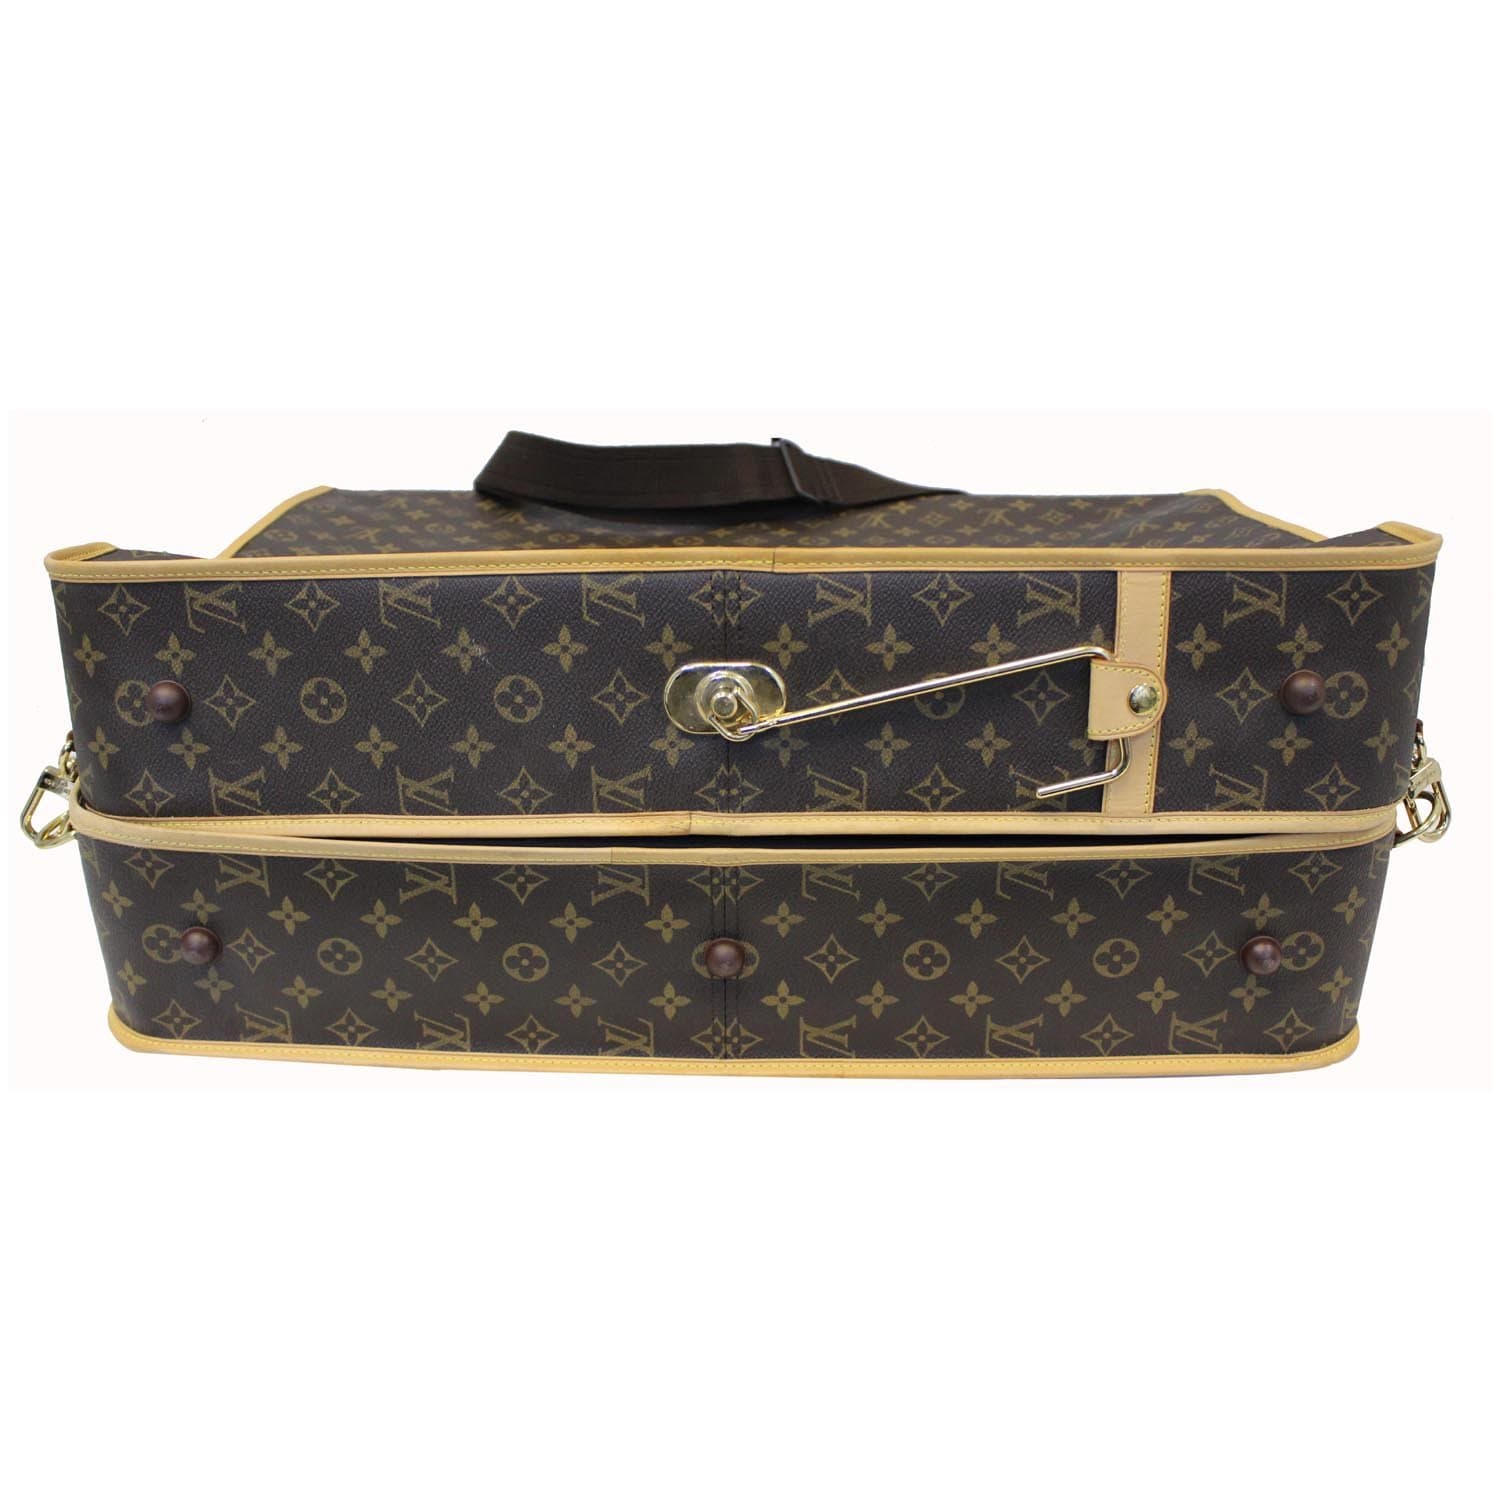 Louis Vuitton Carry On - 389 For Sale on 1stDibs